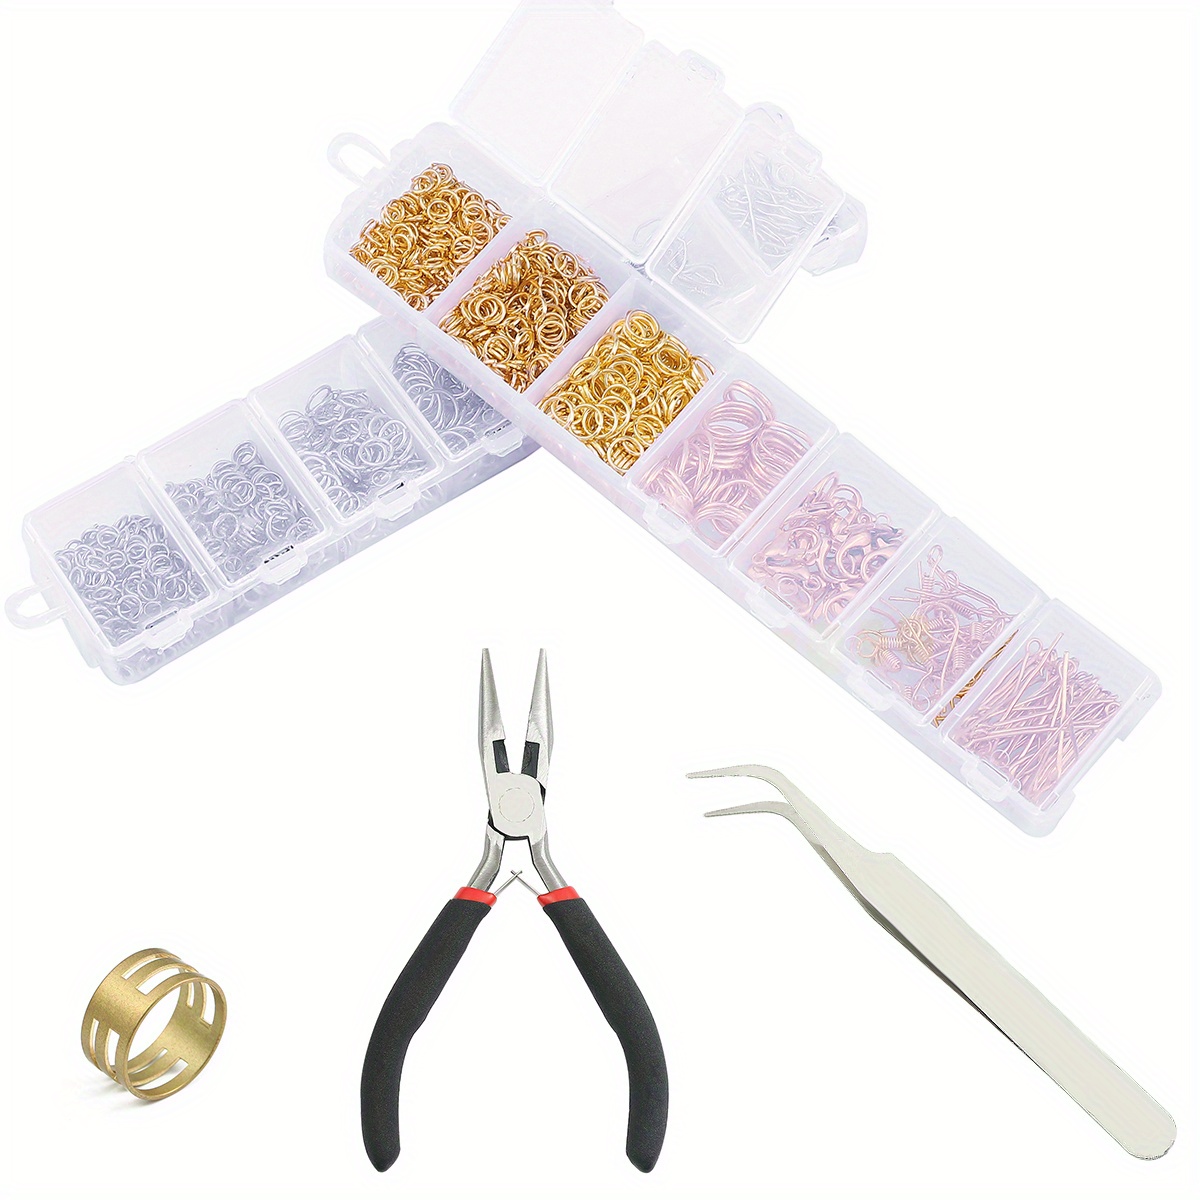 DasMorine Jewellery Making Tools Kit,Jewelry Making Supplies with Jewelry  Pliers Beading Wires,Jewelry Findings Earring Making Kit for Starter and  Adults : : Arts & Crafts